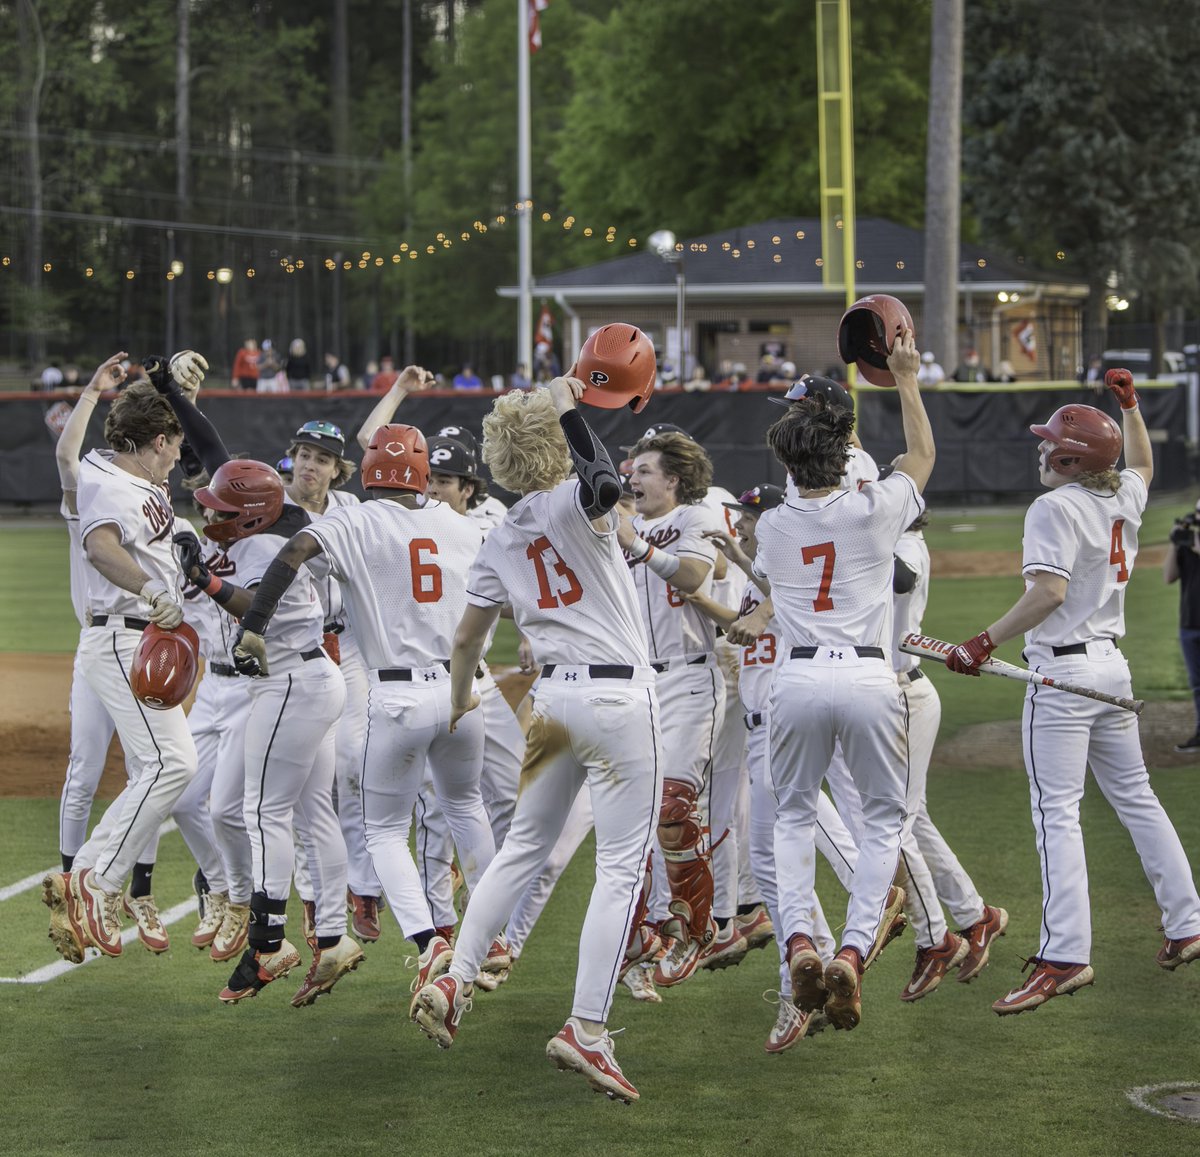 The @giaasports Baseball State Championship series resumes Monday, May 20.  @FPDVikingSports will play @BrkstoneCougars at 4:00 pm at Luther Williams Field in Game 2.  IF Game 3 is necessary, it would be played at 7:00 pm.  Let's go Viking Nation -- come loud and wear your red!!